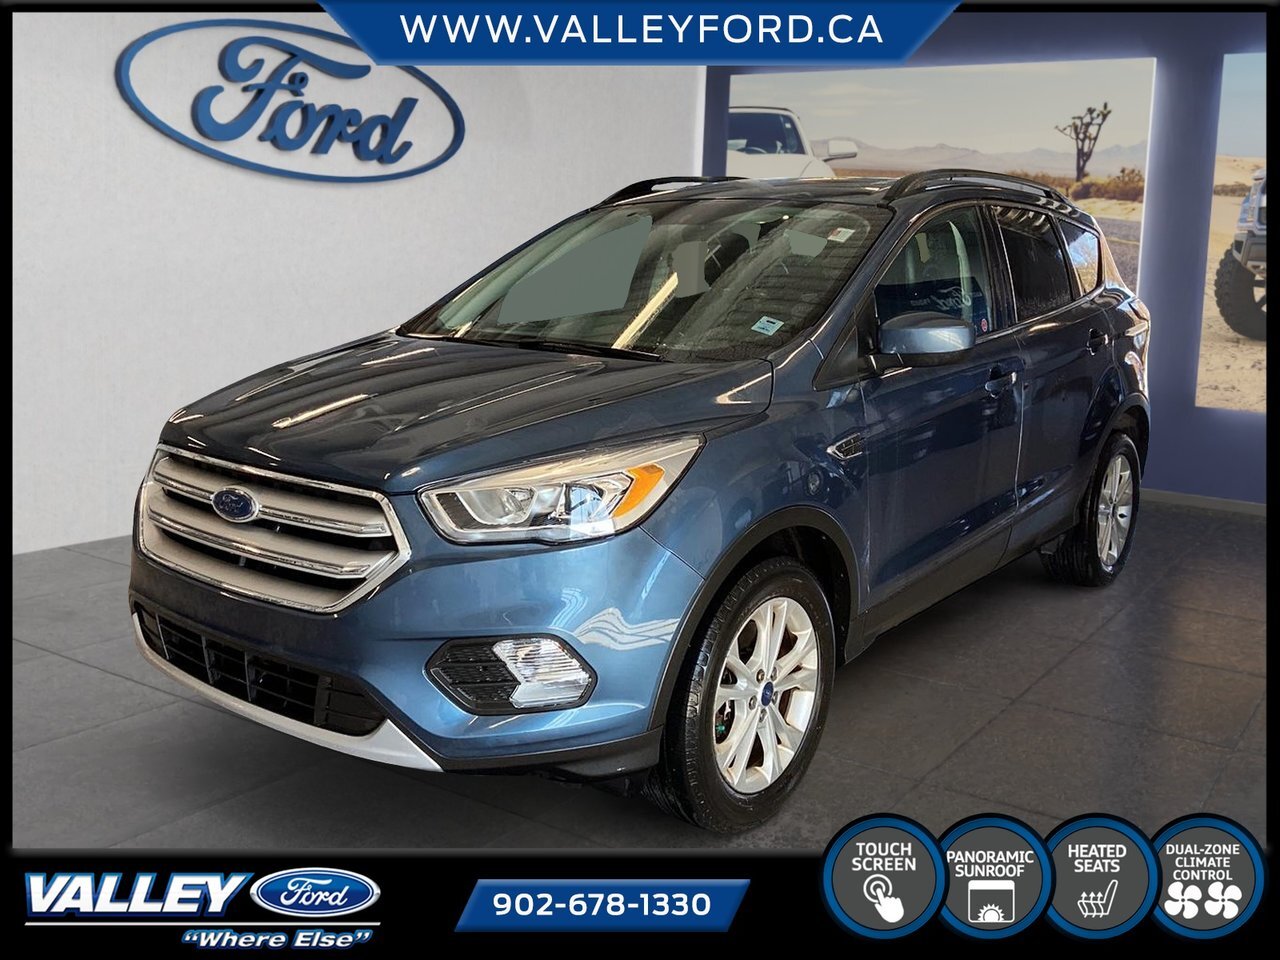 2018 Ford Escape SEL PANORAMIC VISTA ROOF